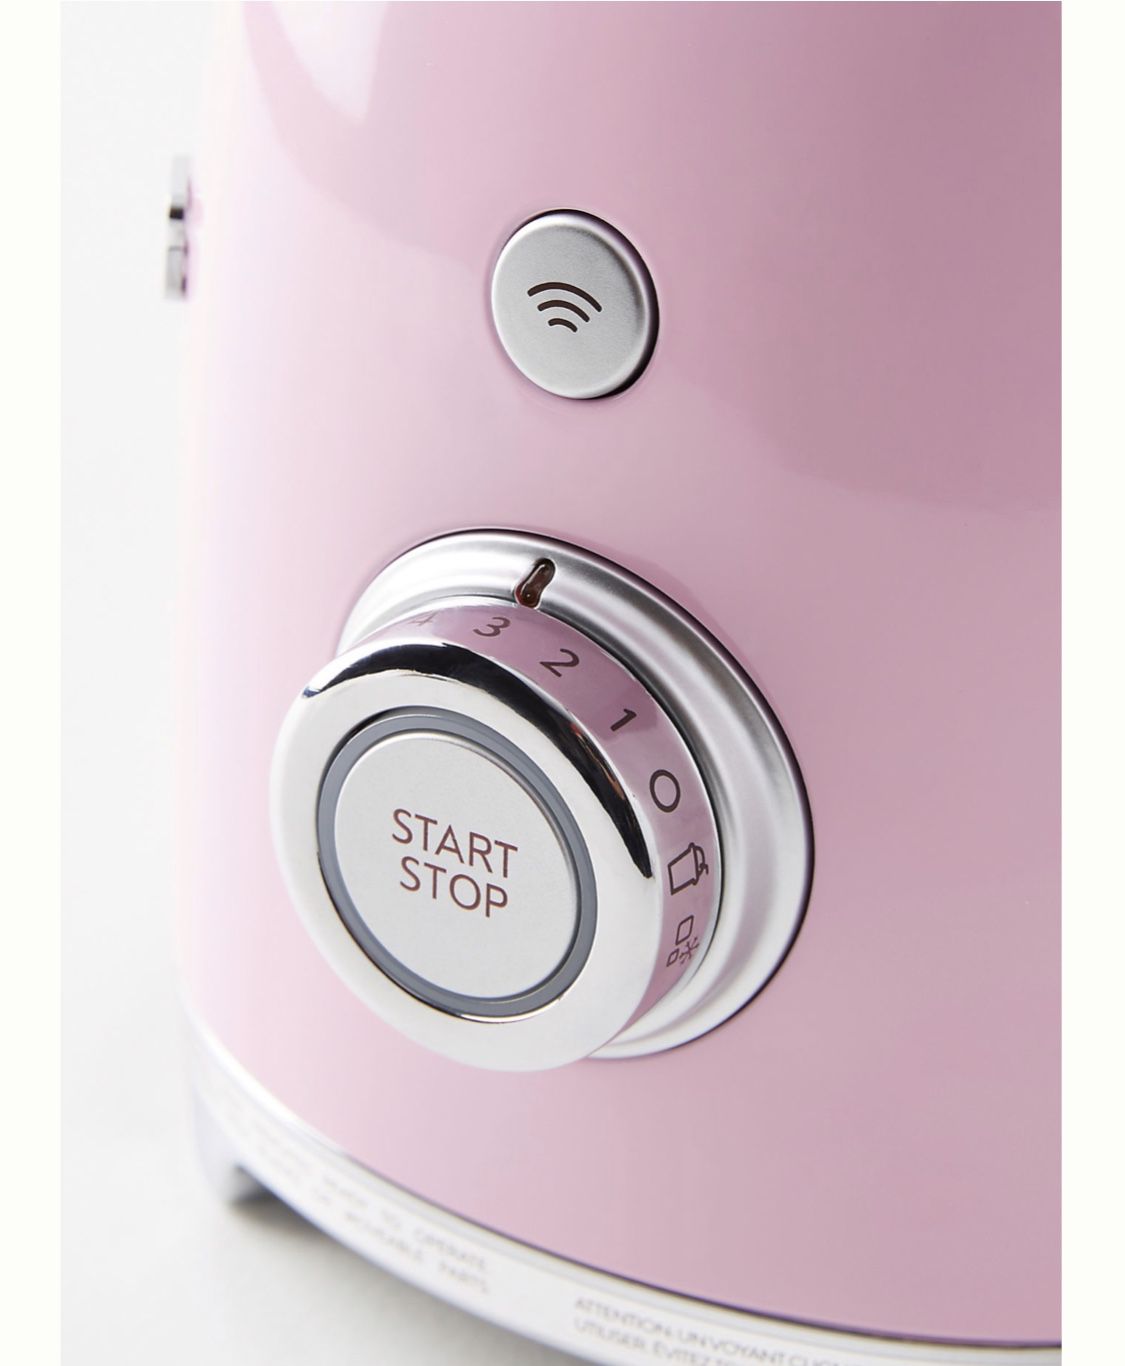 New!! SMEG 50’s Retro Style 7-Cup Blender Pink!!!